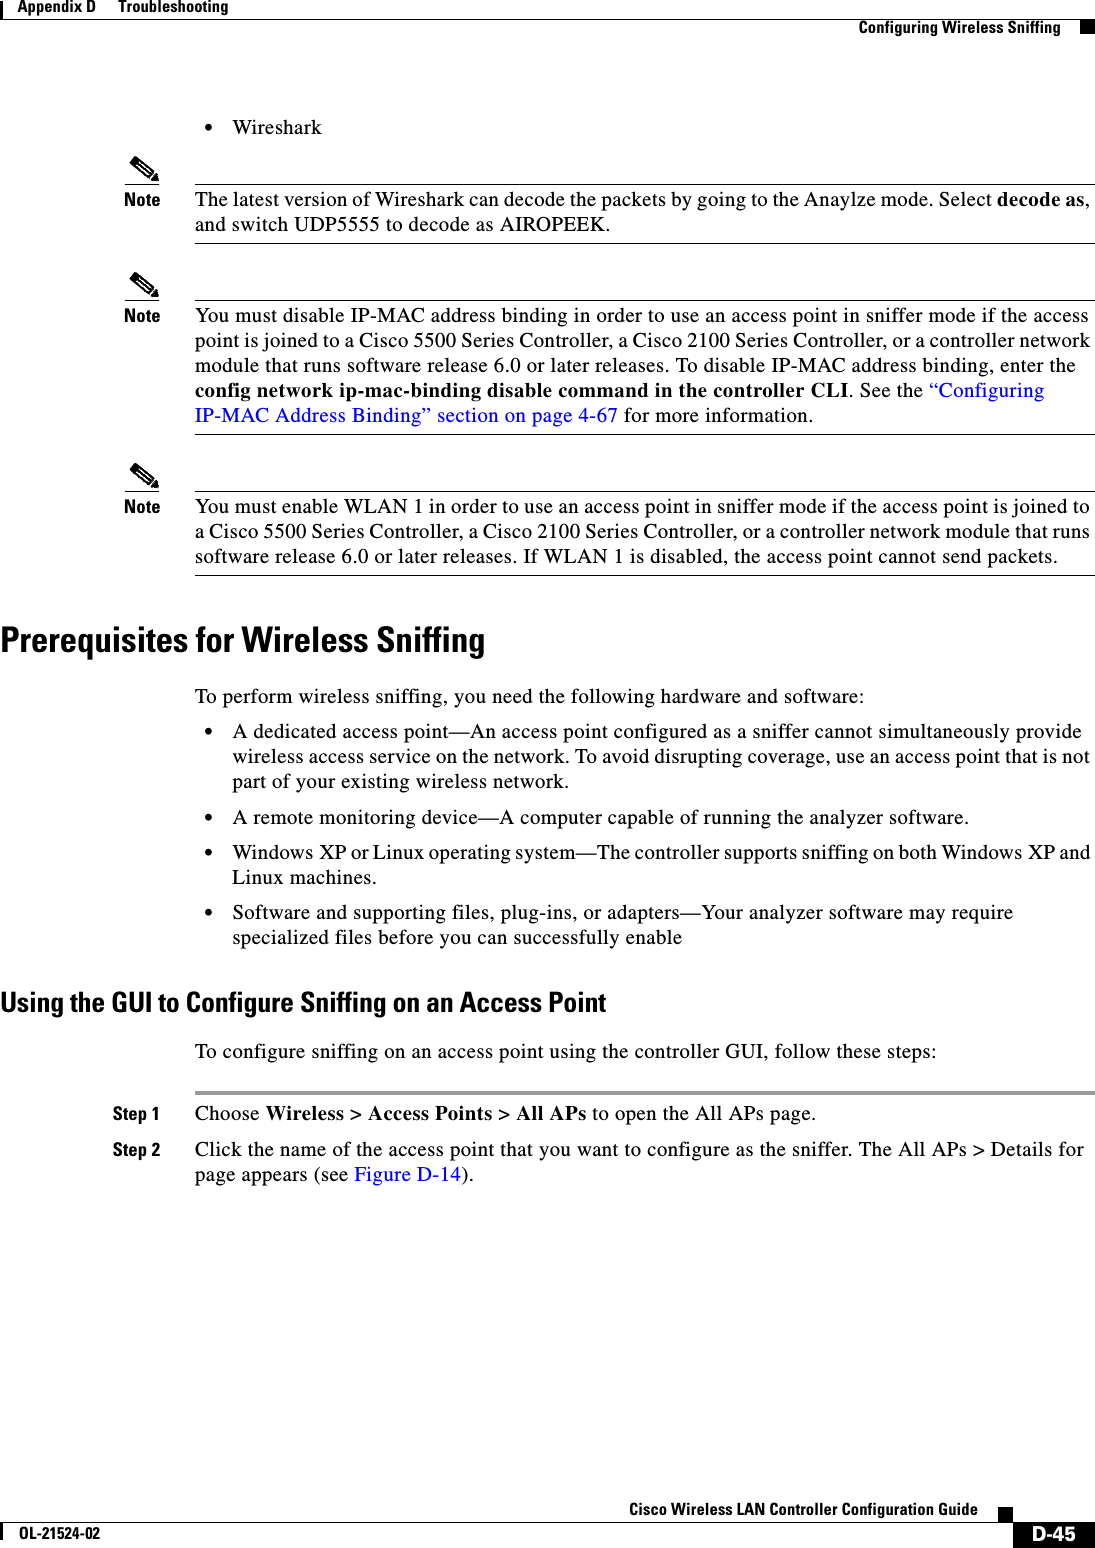  D-45Cisco Wireless LAN Controller Configuration GuideOL-21524-02Appendix D      Troubleshooting  Configuring Wireless Sniffing  • WiresharkNote The latest version of Wireshark can decode the packets by going to the Anaylze mode. Select decode as, and switch UDP5555 to decode as AIROPEEK.Note You must disable IP-MAC address binding in order to use an access point in sniffer mode if the access point is joined to a Cisco 5500 Series Controller, a Cisco 2100 Series Controller, or a controller network module that runs software release 6.0 or later releases. To disable IP-MAC address binding, enter the config network ip-mac-binding disable command in the controller CLI. See the “Configuring IP-MAC Address Binding” section on page 4-67 for more information.Note You must enable WLAN 1 in order to use an access point in sniffer mode if the access point is joined to a Cisco 5500 Series Controller, a Cisco 2100 Series Controller, or a controller network module that runs software release 6.0 or later releases. If WLAN 1 is disabled, the access point cannot send packets.Prerequisites for Wireless SniffingTo perform wireless sniffing, you need the following hardware and software:  • A dedicated access point—An access point configured as a sniffer cannot simultaneously provide wireless access service on the network. To avoid disrupting coverage, use an access point that is not part of your existing wireless network.  • A remote monitoring device—A computer capable of running the analyzer software.  • Windows XP or Linux operating system—The controller supports sniffing on both Windows XP and Linux machines.  • Software and supporting files, plug-ins, or adapters—Your analyzer software may require specialized files before you can successfully enable Using the GUI to Configure Sniffing on an Access PointTo configure sniffing on an access point using the controller GUI, follow these steps:Step 1 Choose Wireless &gt; Access Points &gt; All APs to open the All APs page.Step 2 Click the name of the access point that you want to configure as the sniffer. The All APs &gt; Details for page appears (see Figure D-14).